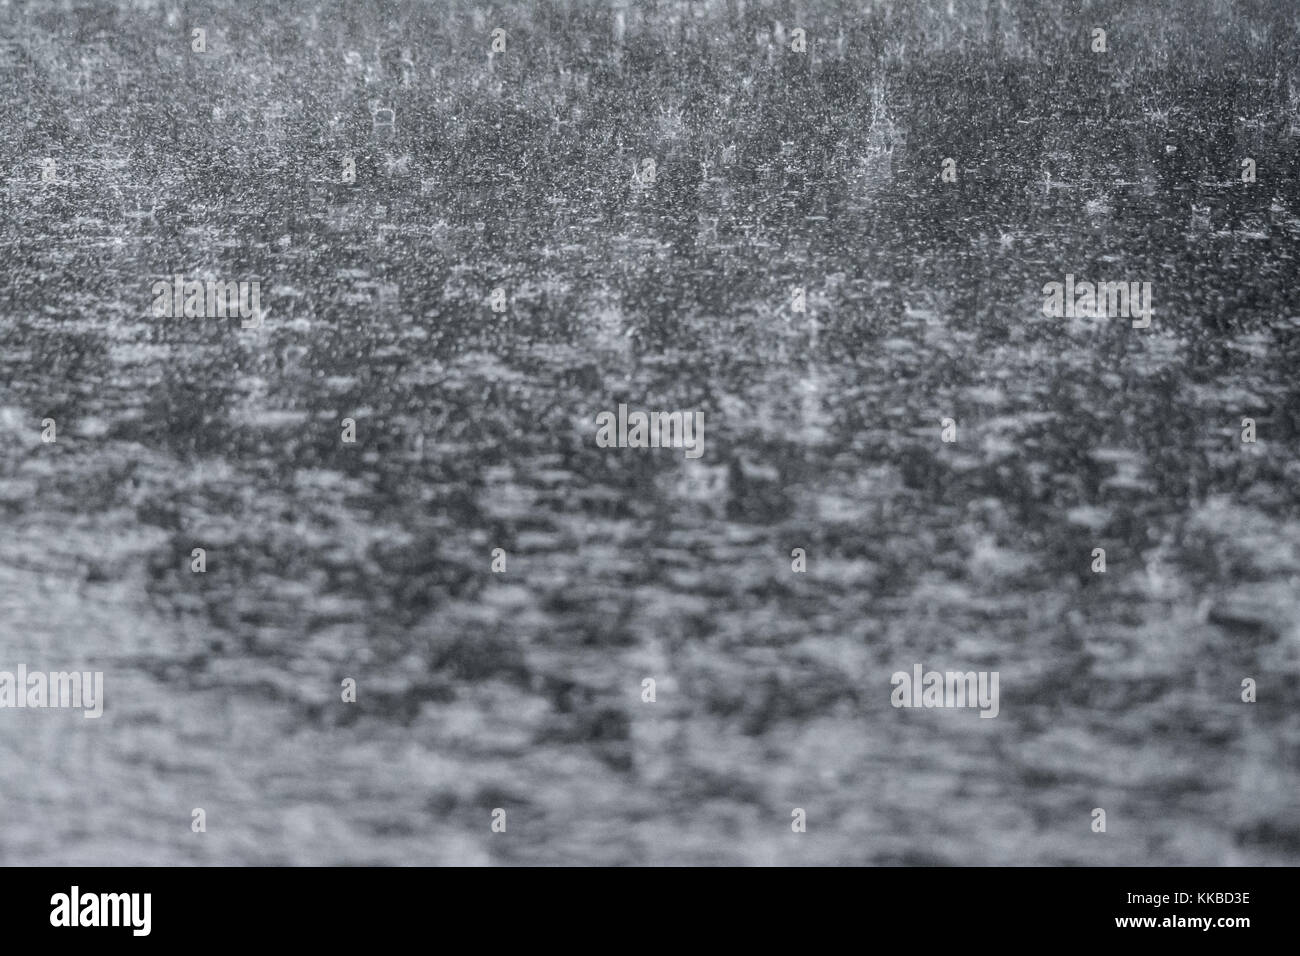 large raindrops falling on the road asphalt during a day of rain Stock Photo